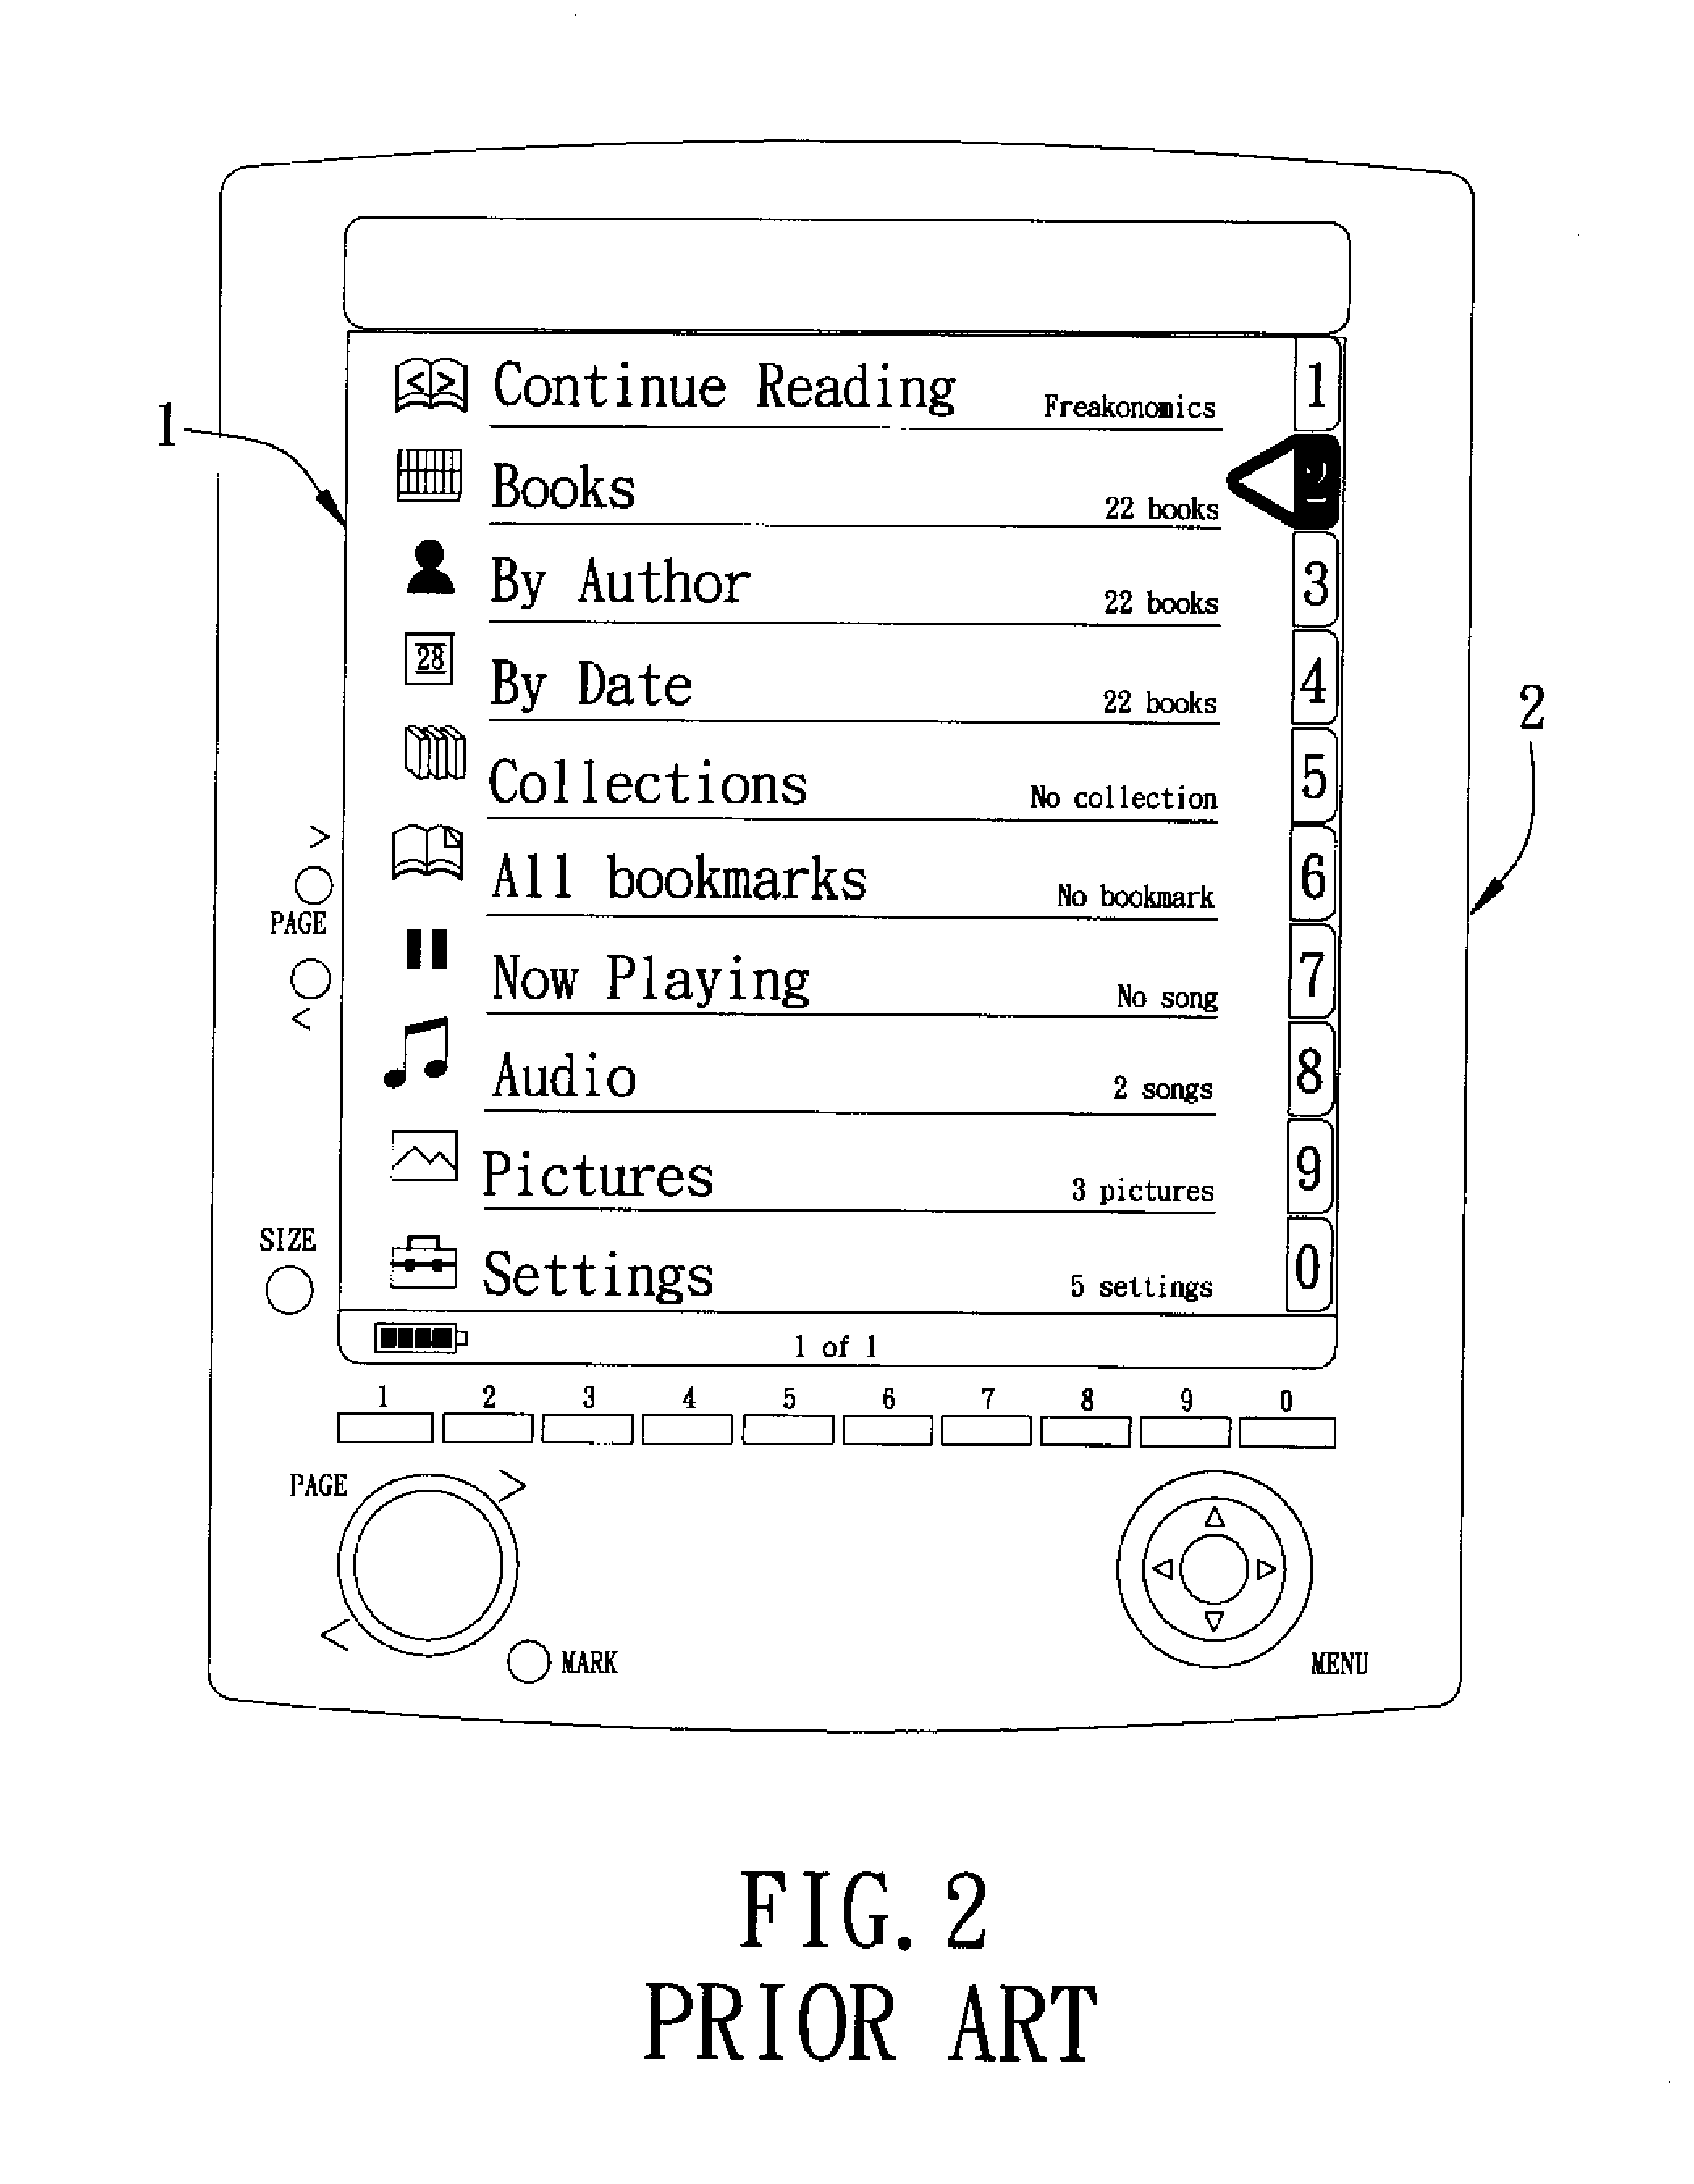 Electronic device capable of displaying digital image information on a removable sheet of electronic paper